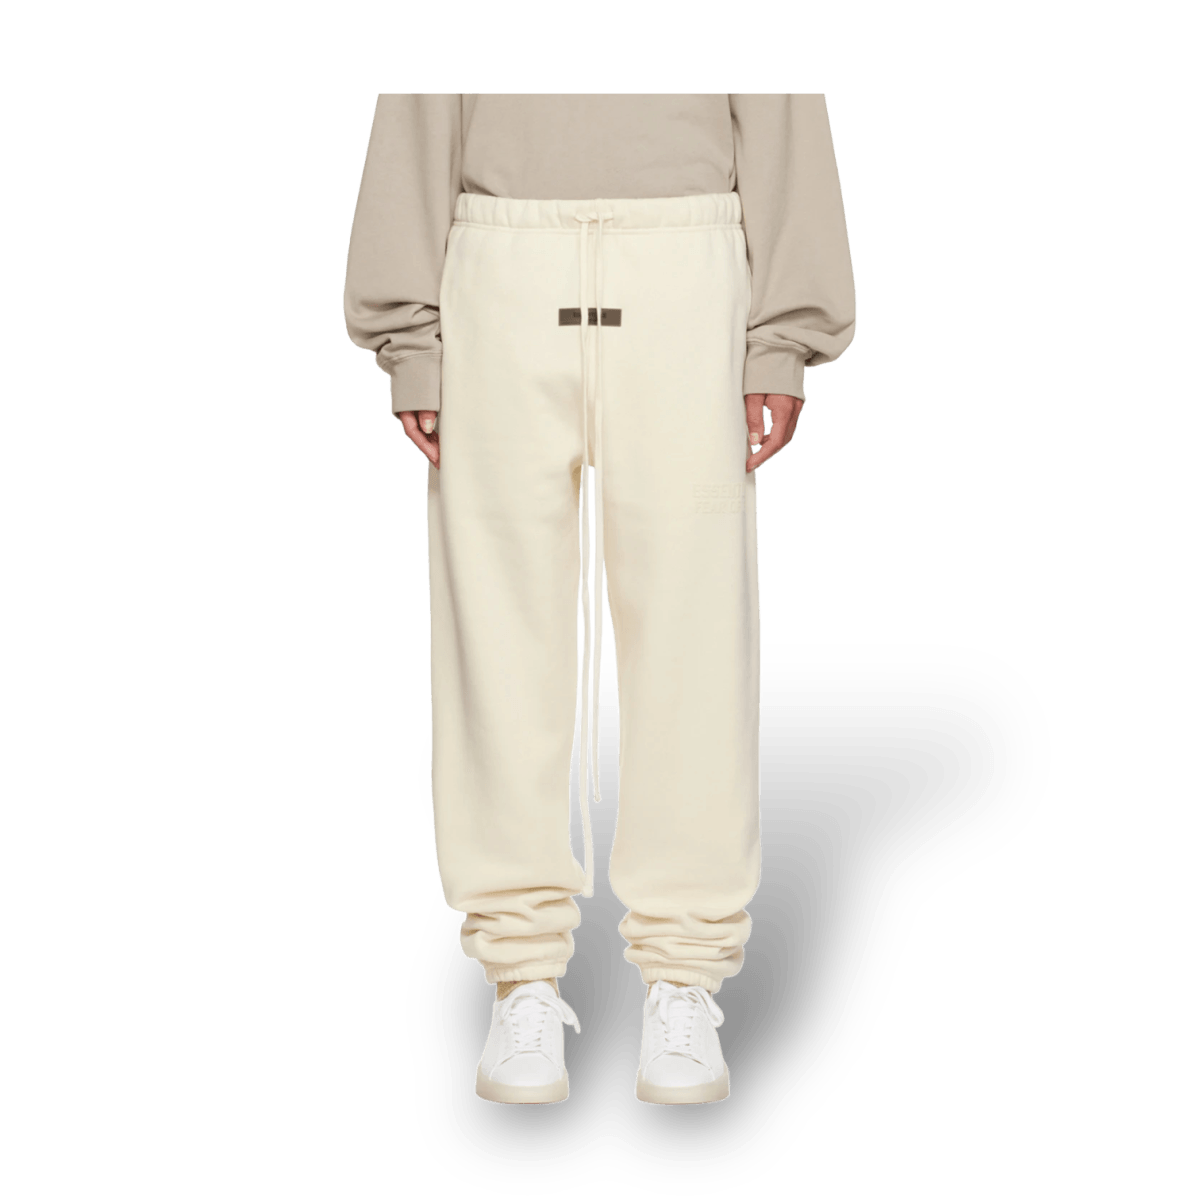 Essentials Fear of God Tapered Cream Sweat Pants - Bottoms - Jawns on Fire Sneakers & Streetwear